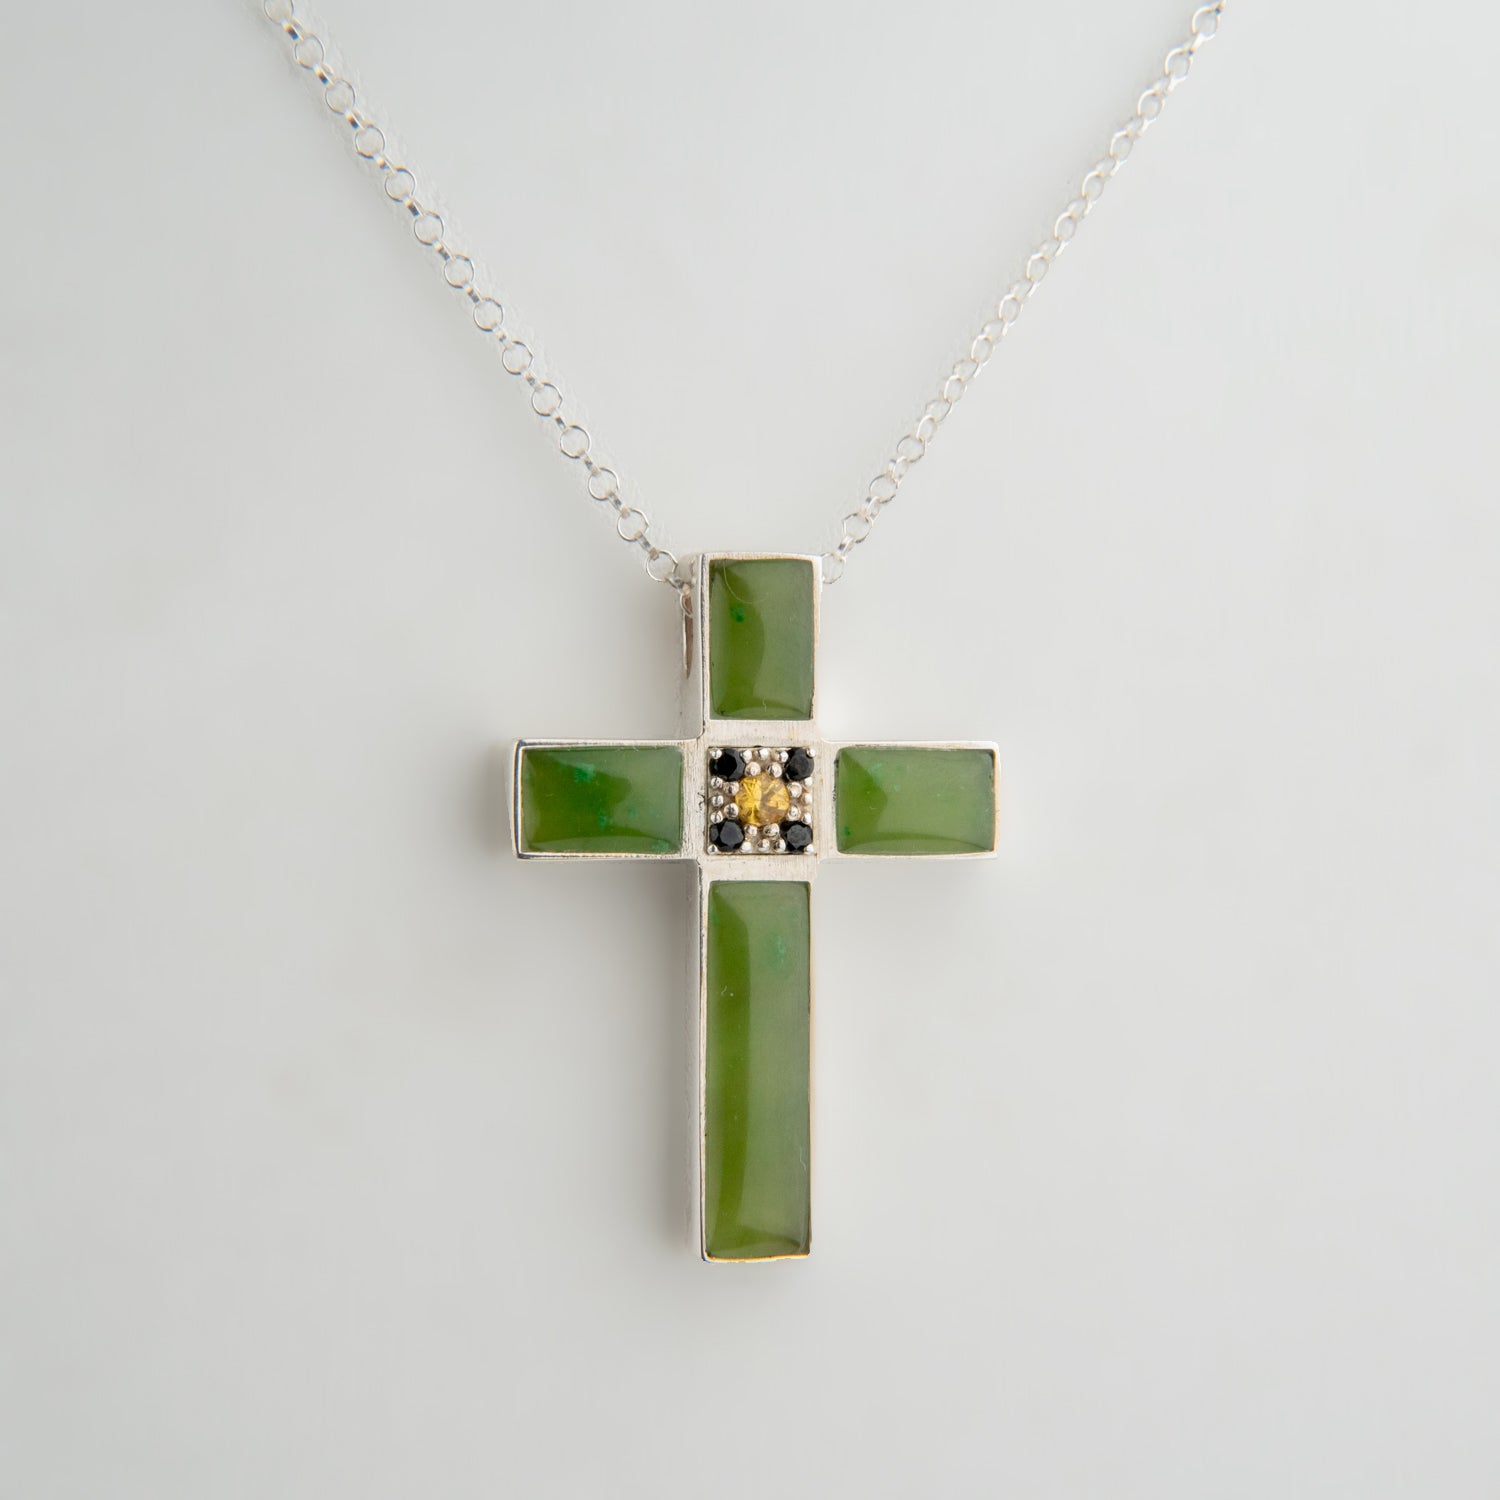 Genuine Jade Sterling Silver Cross Pendant with 18" Sterling Silver Necklace